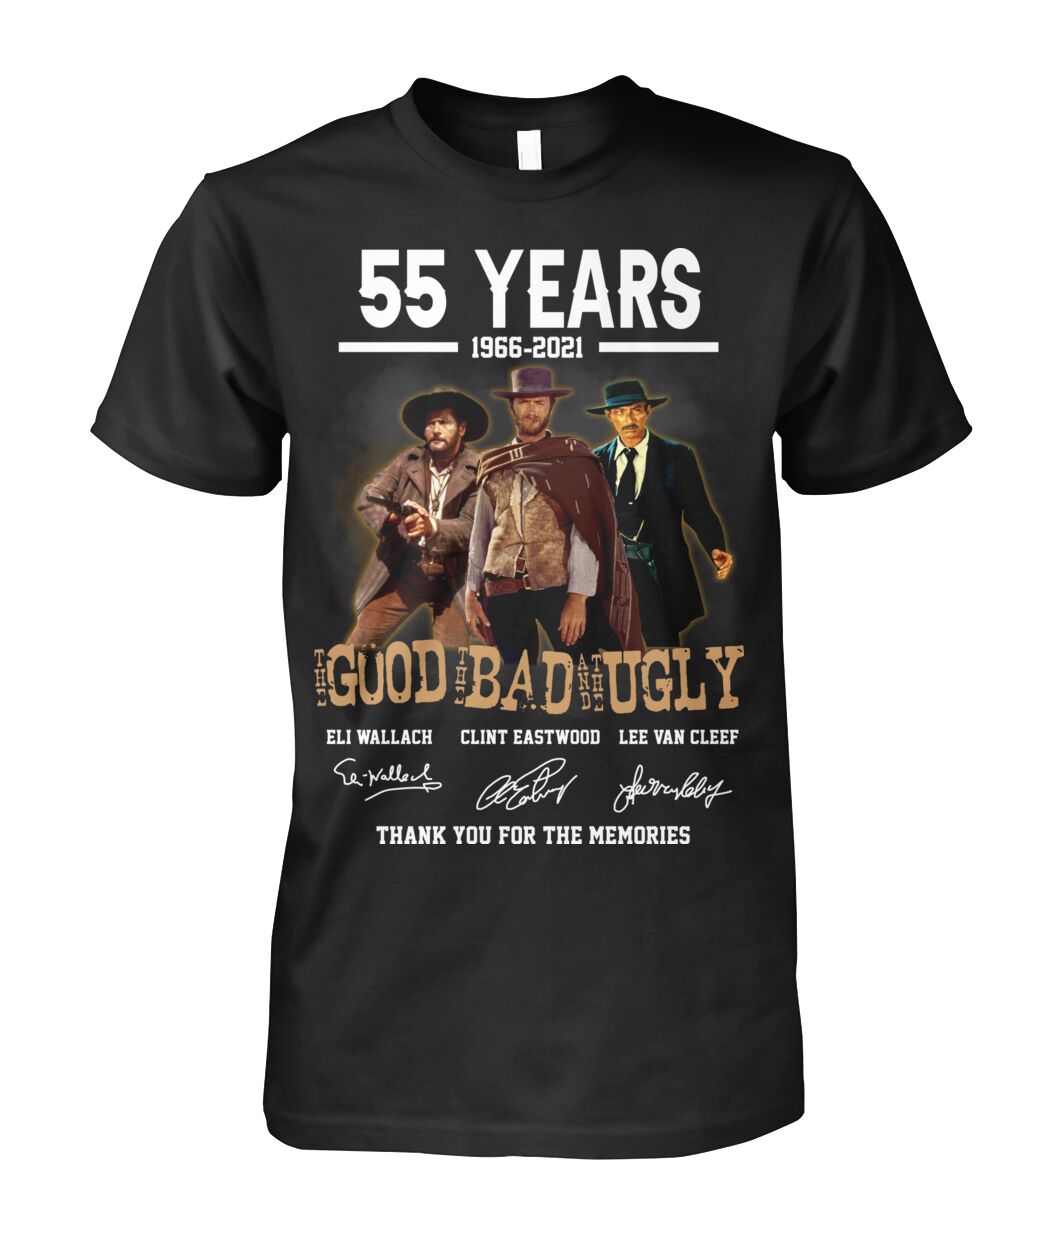 55 years the good the bad and the ugly signature shirt